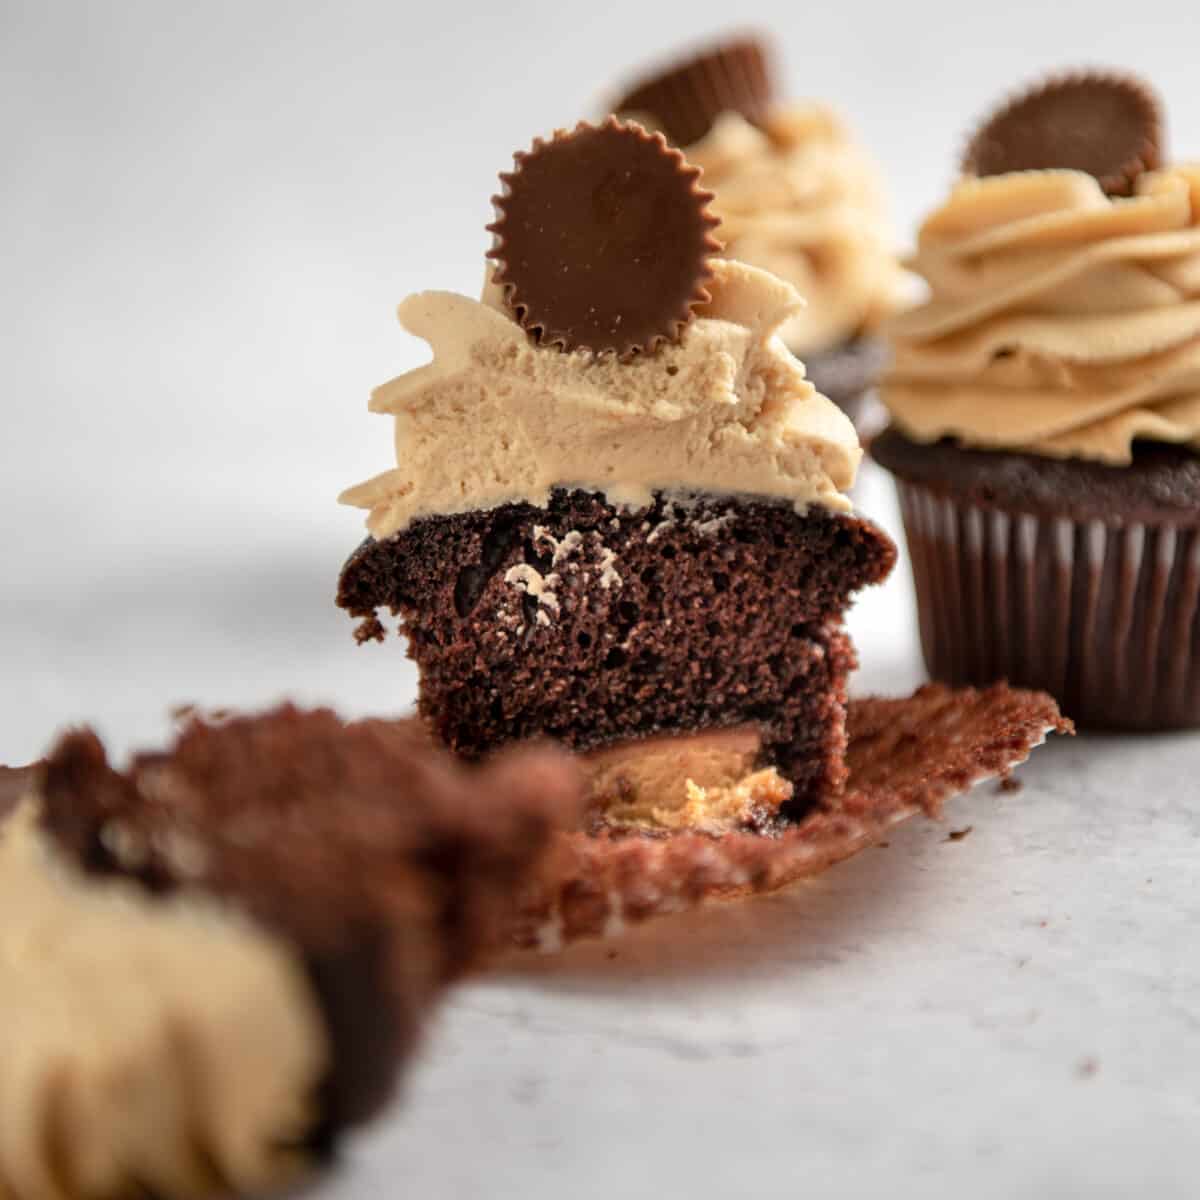 A melted Reese's candy instead the center of a chocolate cupcake.